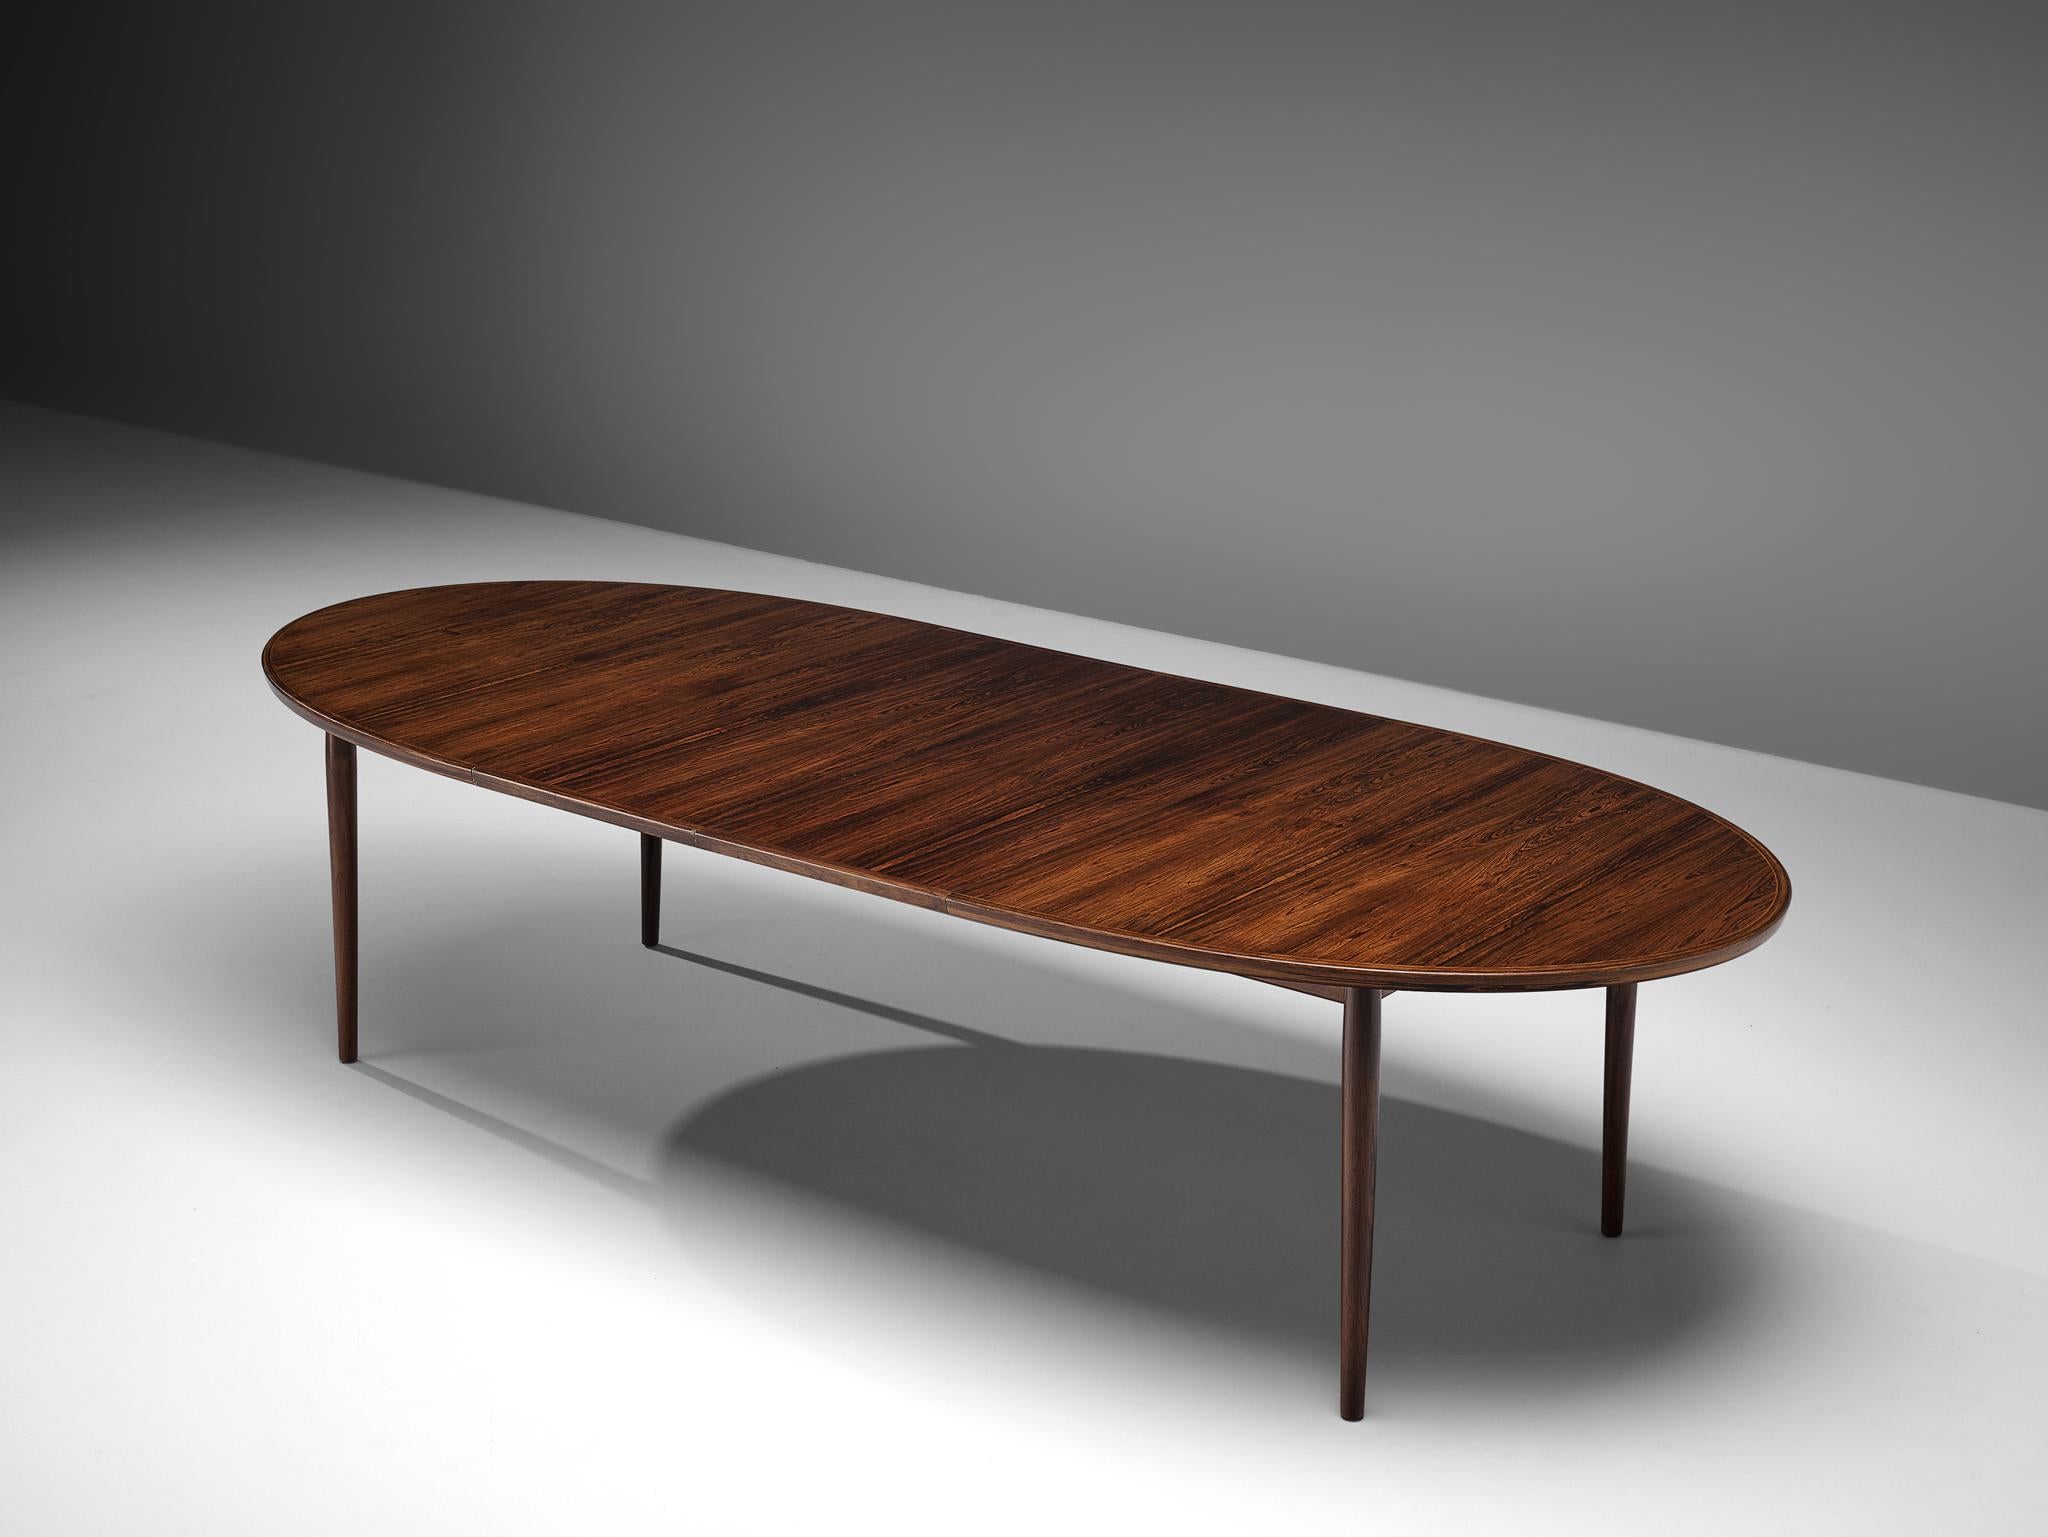 Dining table in rosewood by Arne Vodder for Sibast, Denmark, 1950s.

Large oval table in rosewood design by Arne Vodder. This extendable table comes with two leaves, which give it an extra length of one meter. The design is modest and allows the